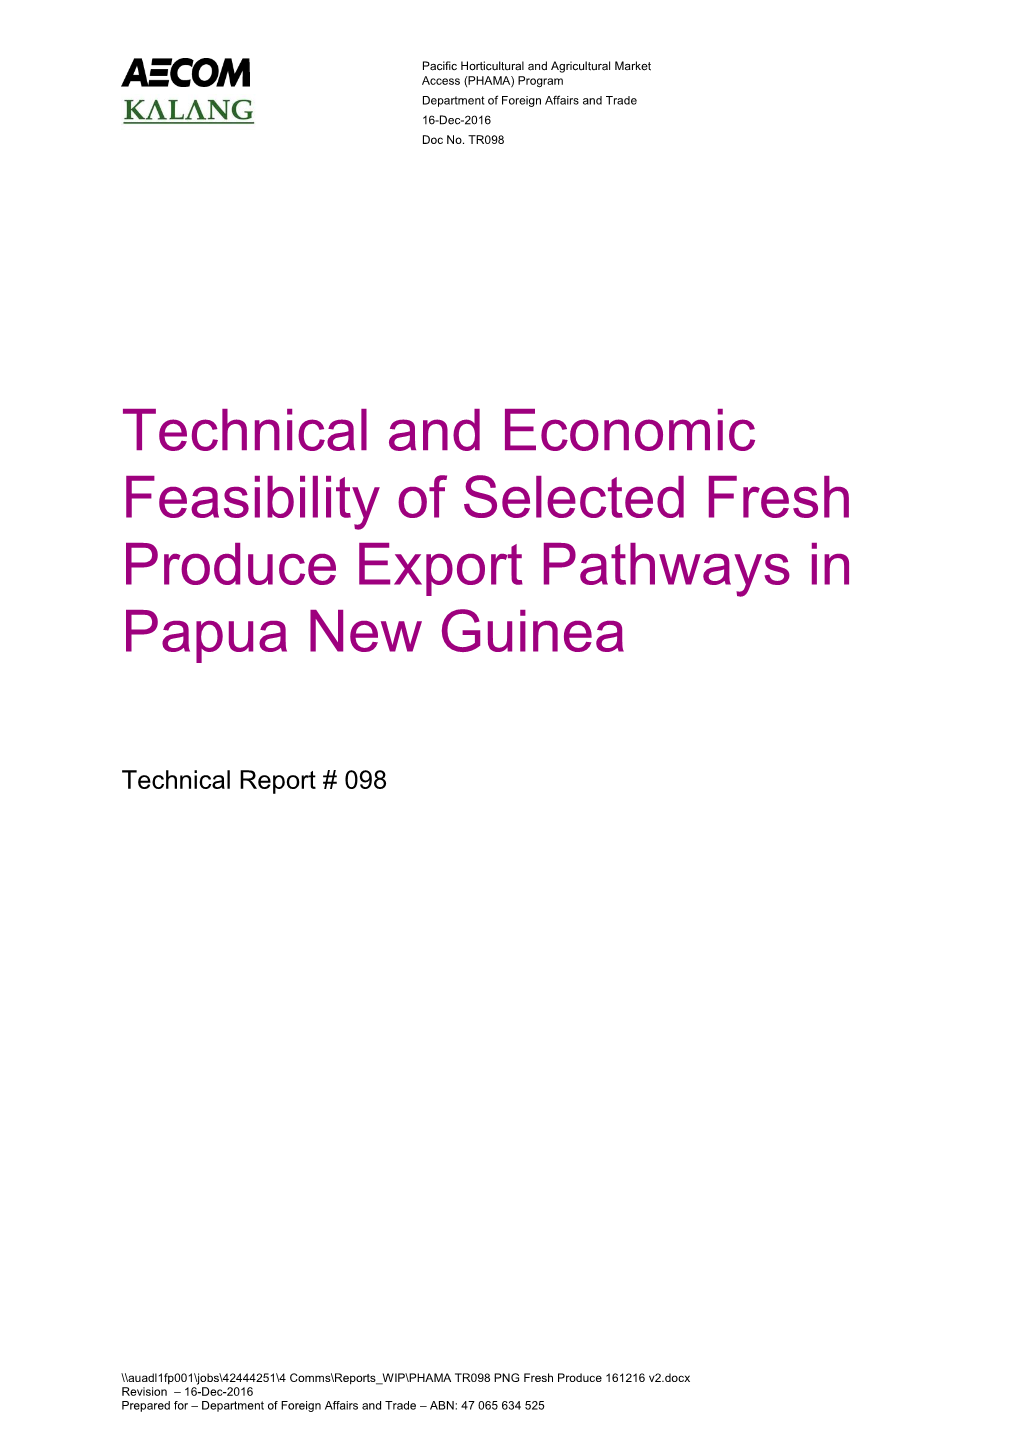 Technical and Economic Feasibility of Selected Fresh Produce Export Pathways in Papua New Guinea